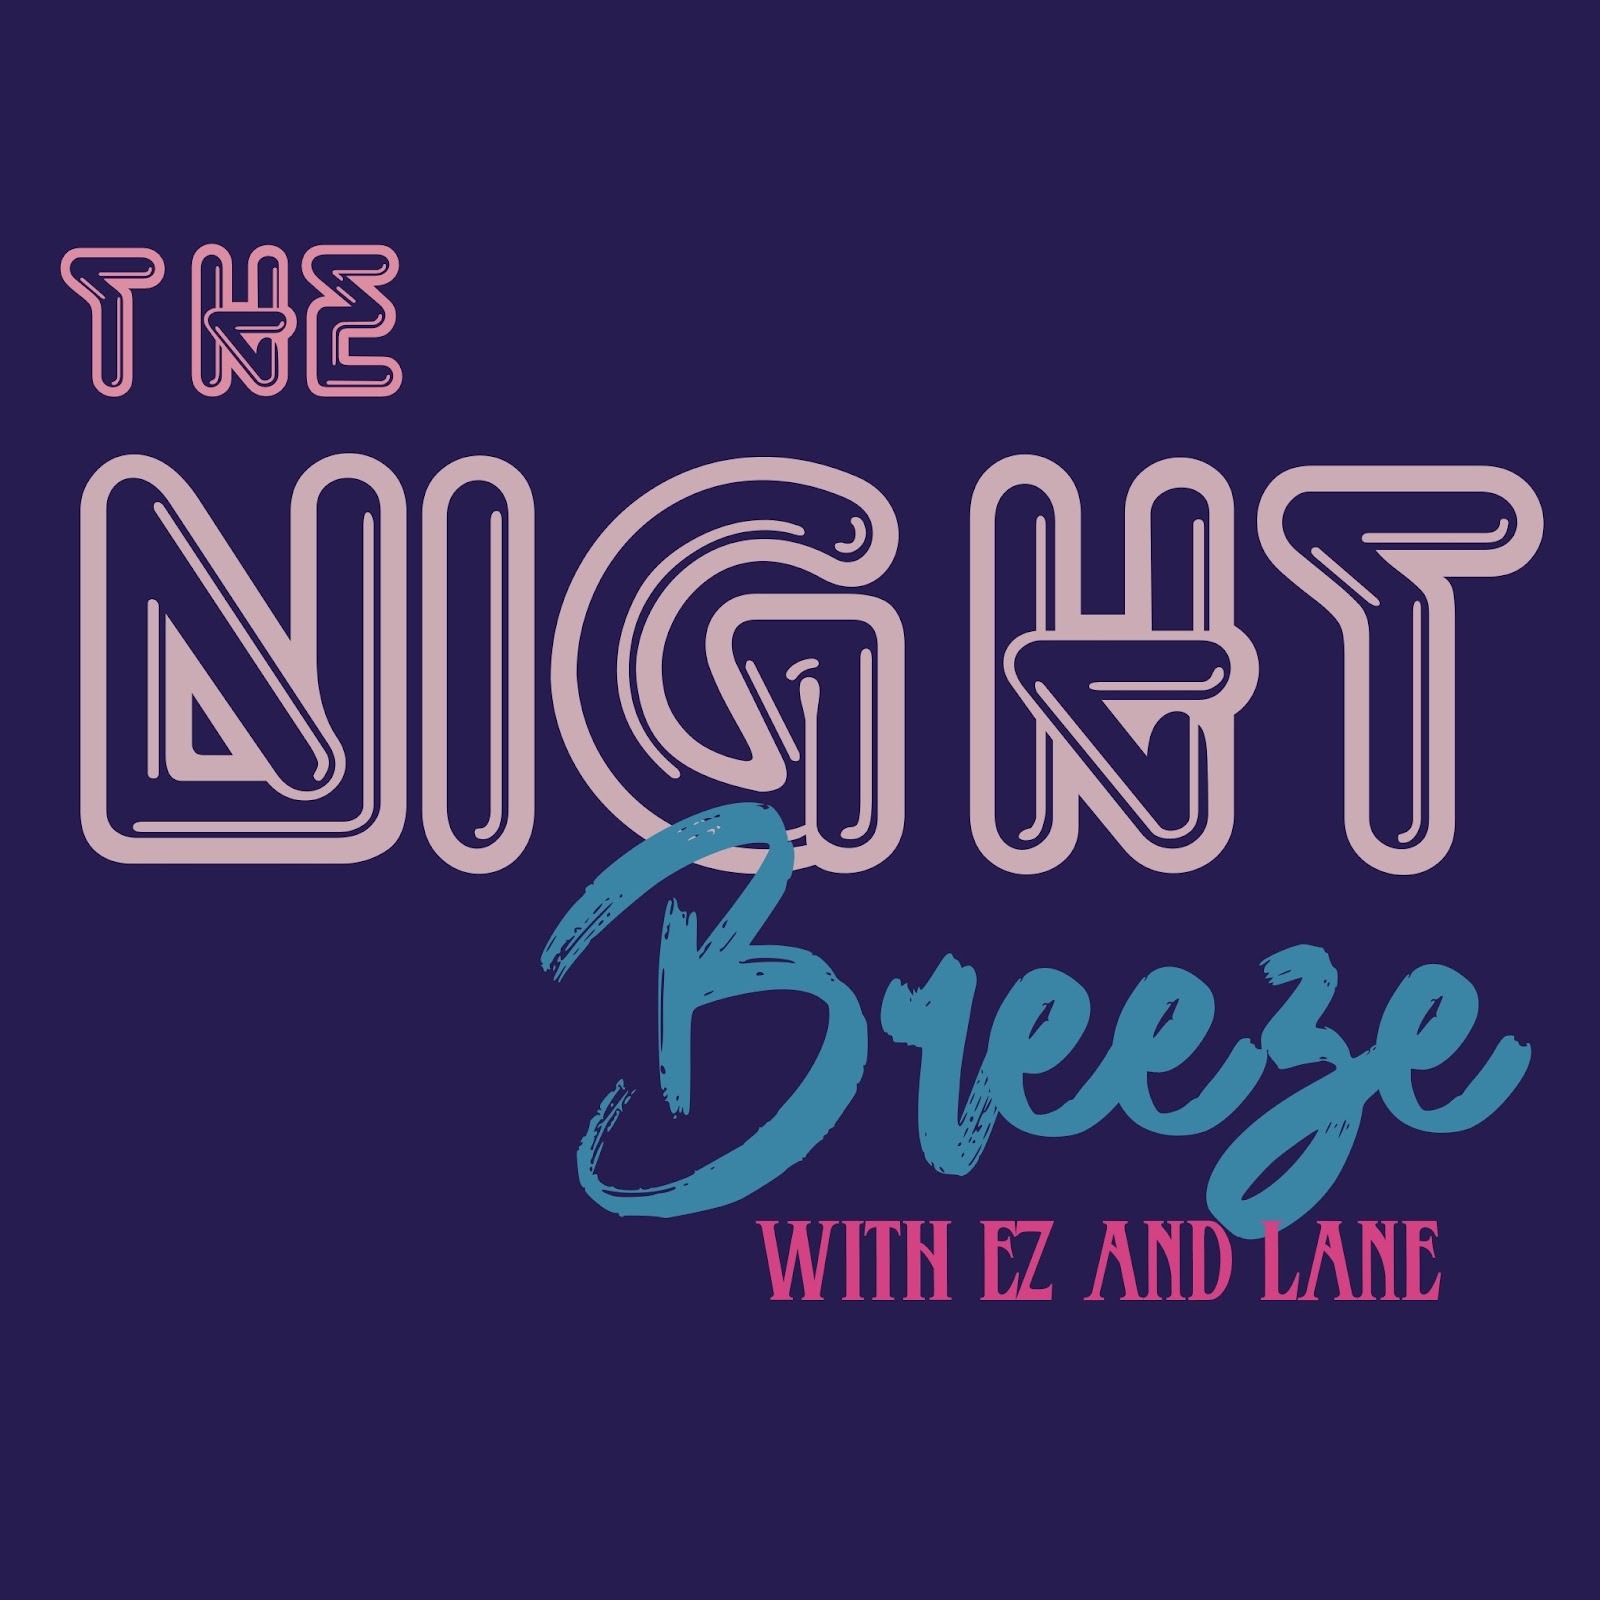 The Night Breeze - Ep 2 - Traveling with Lord of the Rings (Book or Movie)